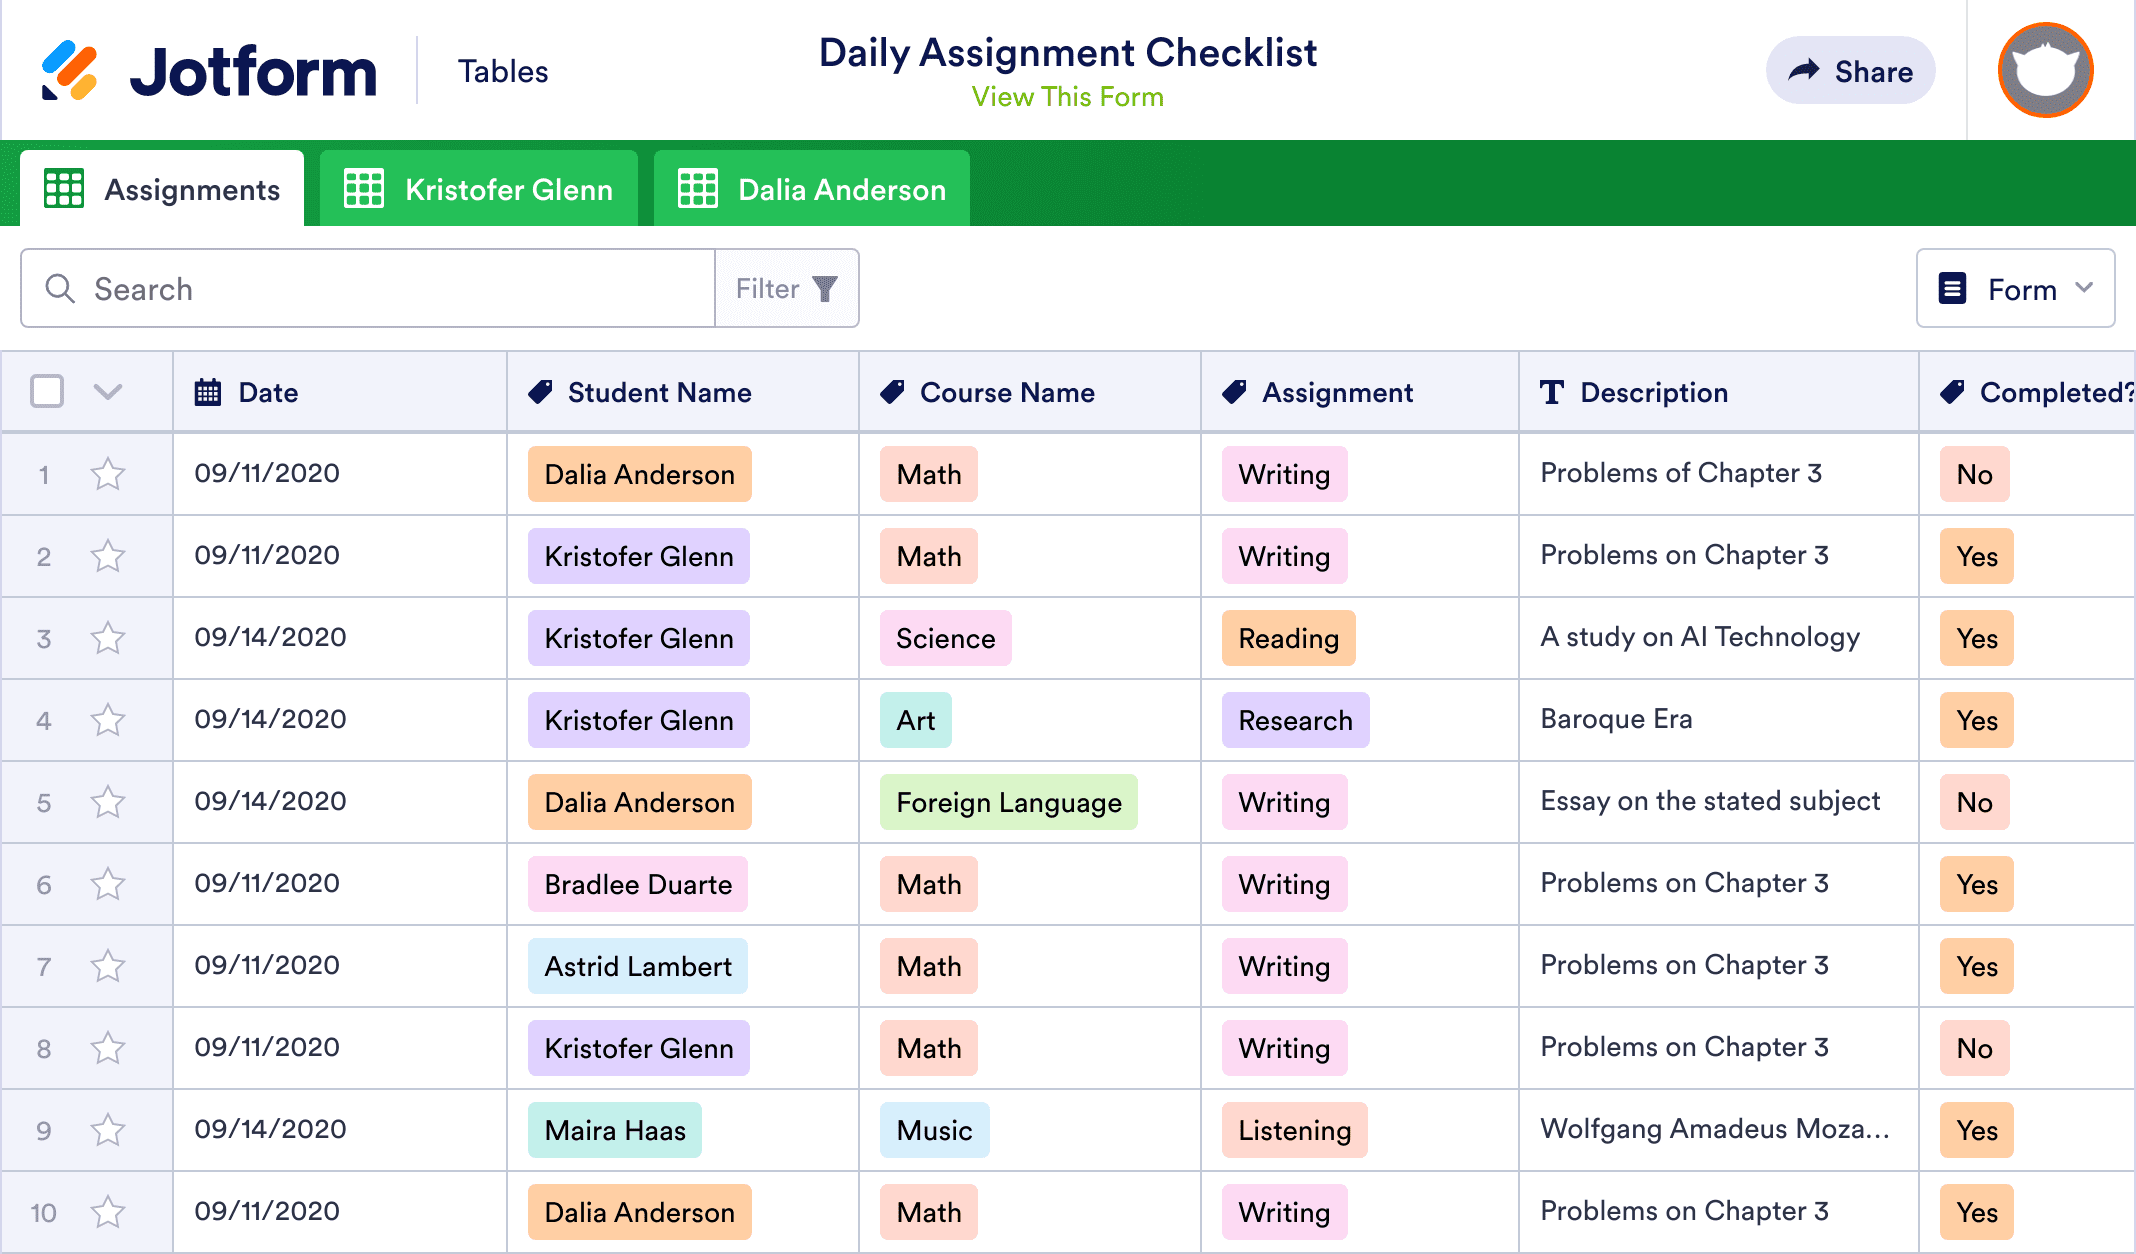 Daily Assignment Checklist